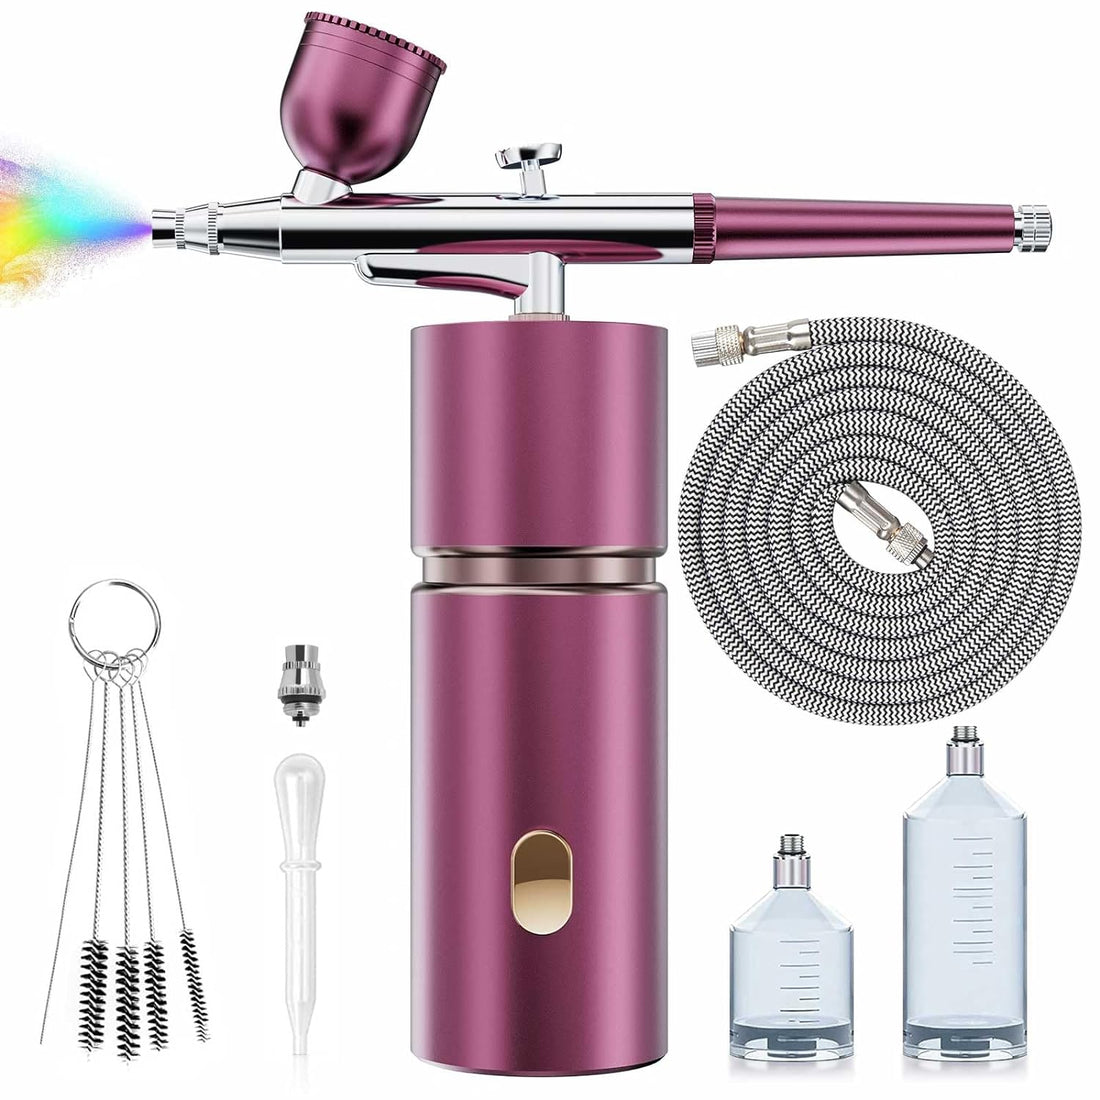 Airbrush-Kit High-Pressure Cordless air-brush with Compressor - Airbrush for nails Handheld Mini Rechargeable nail airbrush machine for Painting, Model, Makeup,Cake Decor